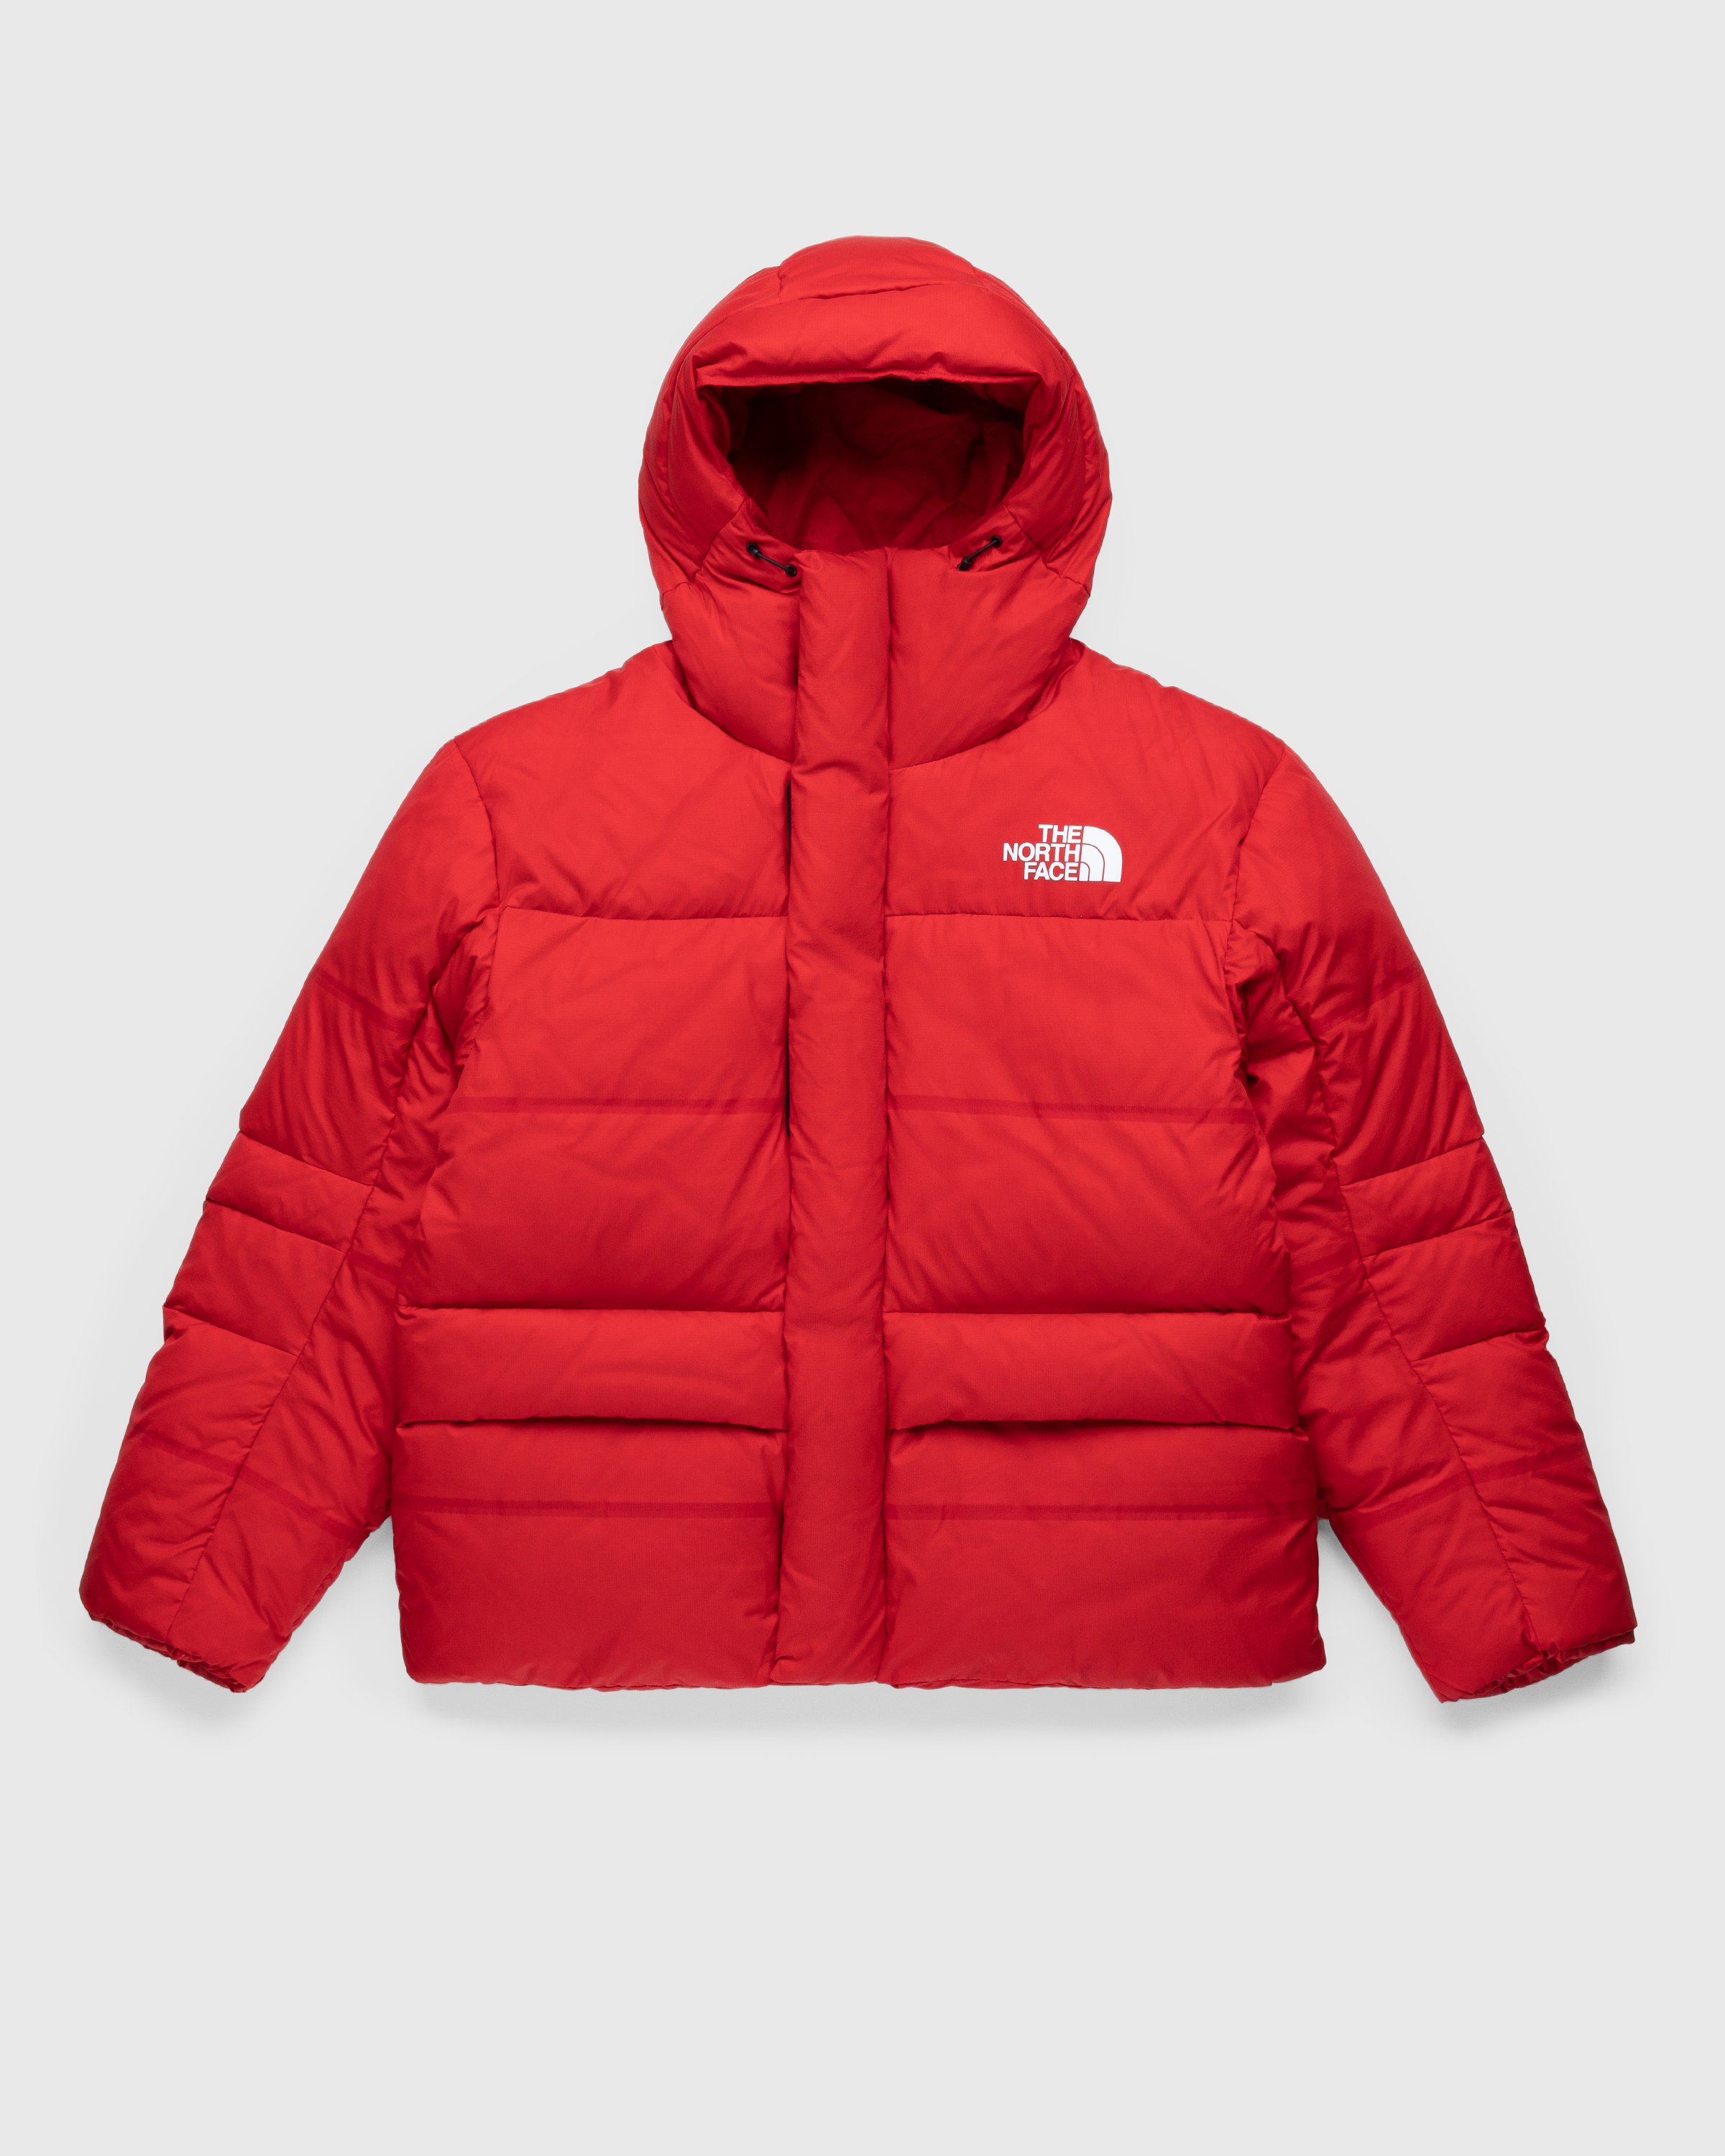 The North Face - RMST Himalayan Parka Red - Clothing - Red - Image 1